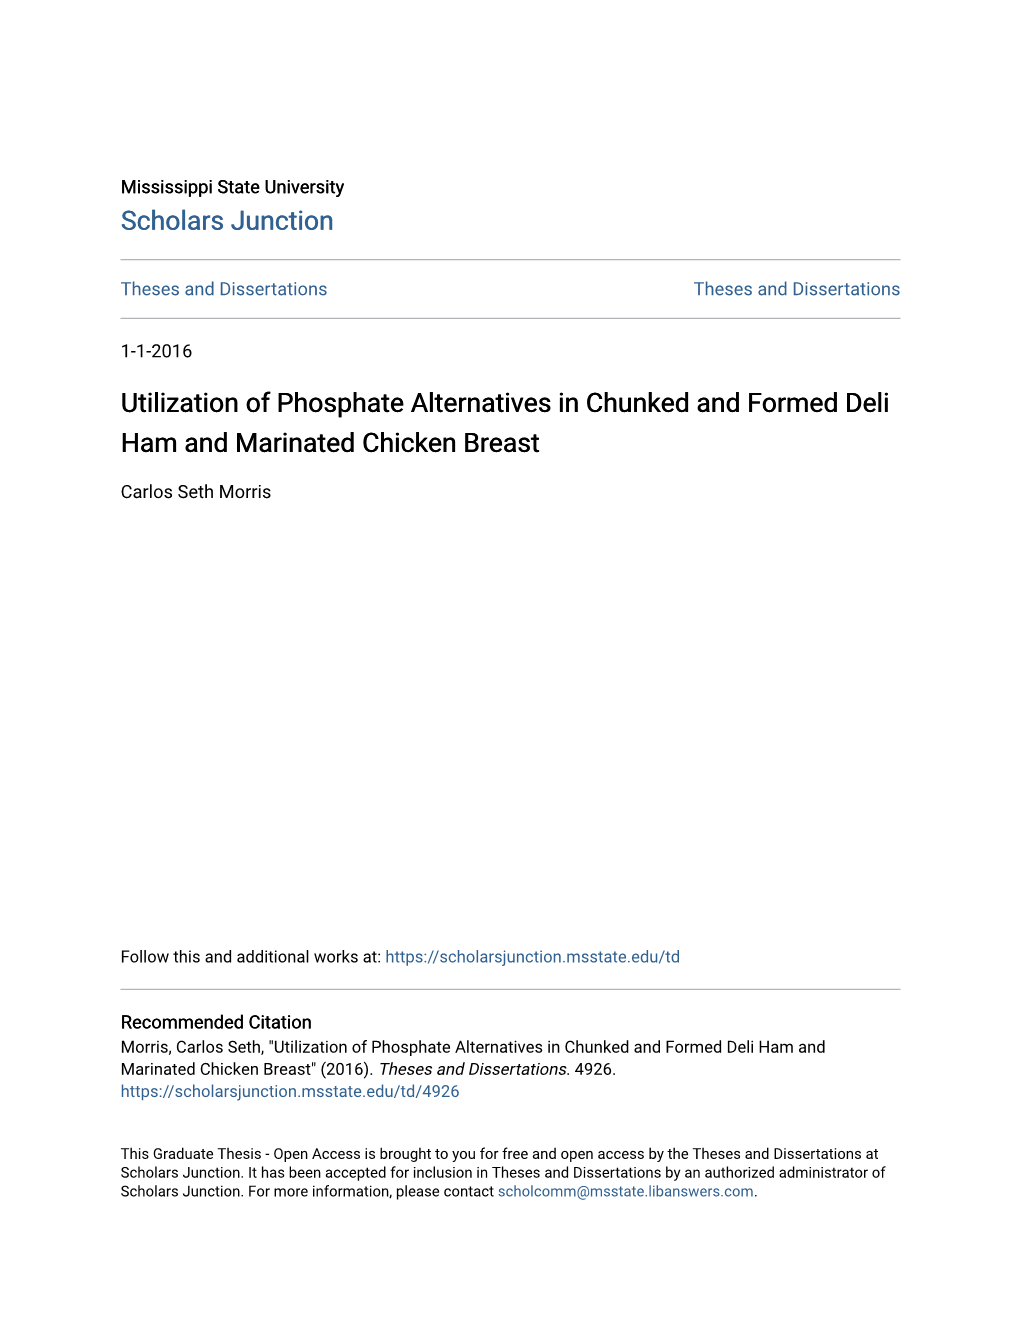 Utilization of Phosphate Alternatives in Chunked and Formed Deli Ham and Marinated Chicken Breast